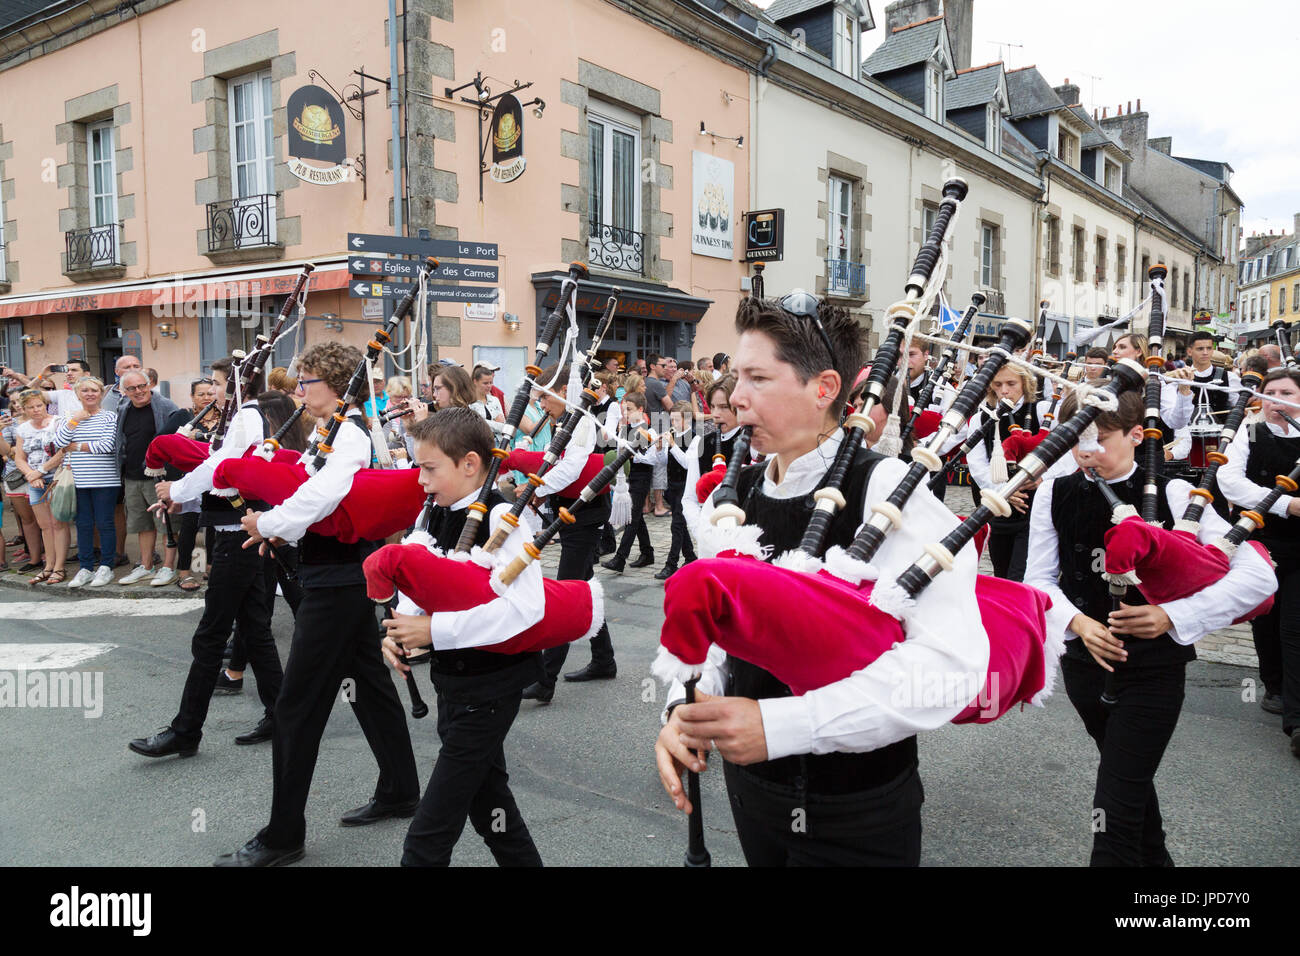 French musicians playing bagpipes, La Fête des Brodeuses, a family festival, Pont L'Abbe, Bigouden, Finistere, Brittany, France Europe Stock Photo